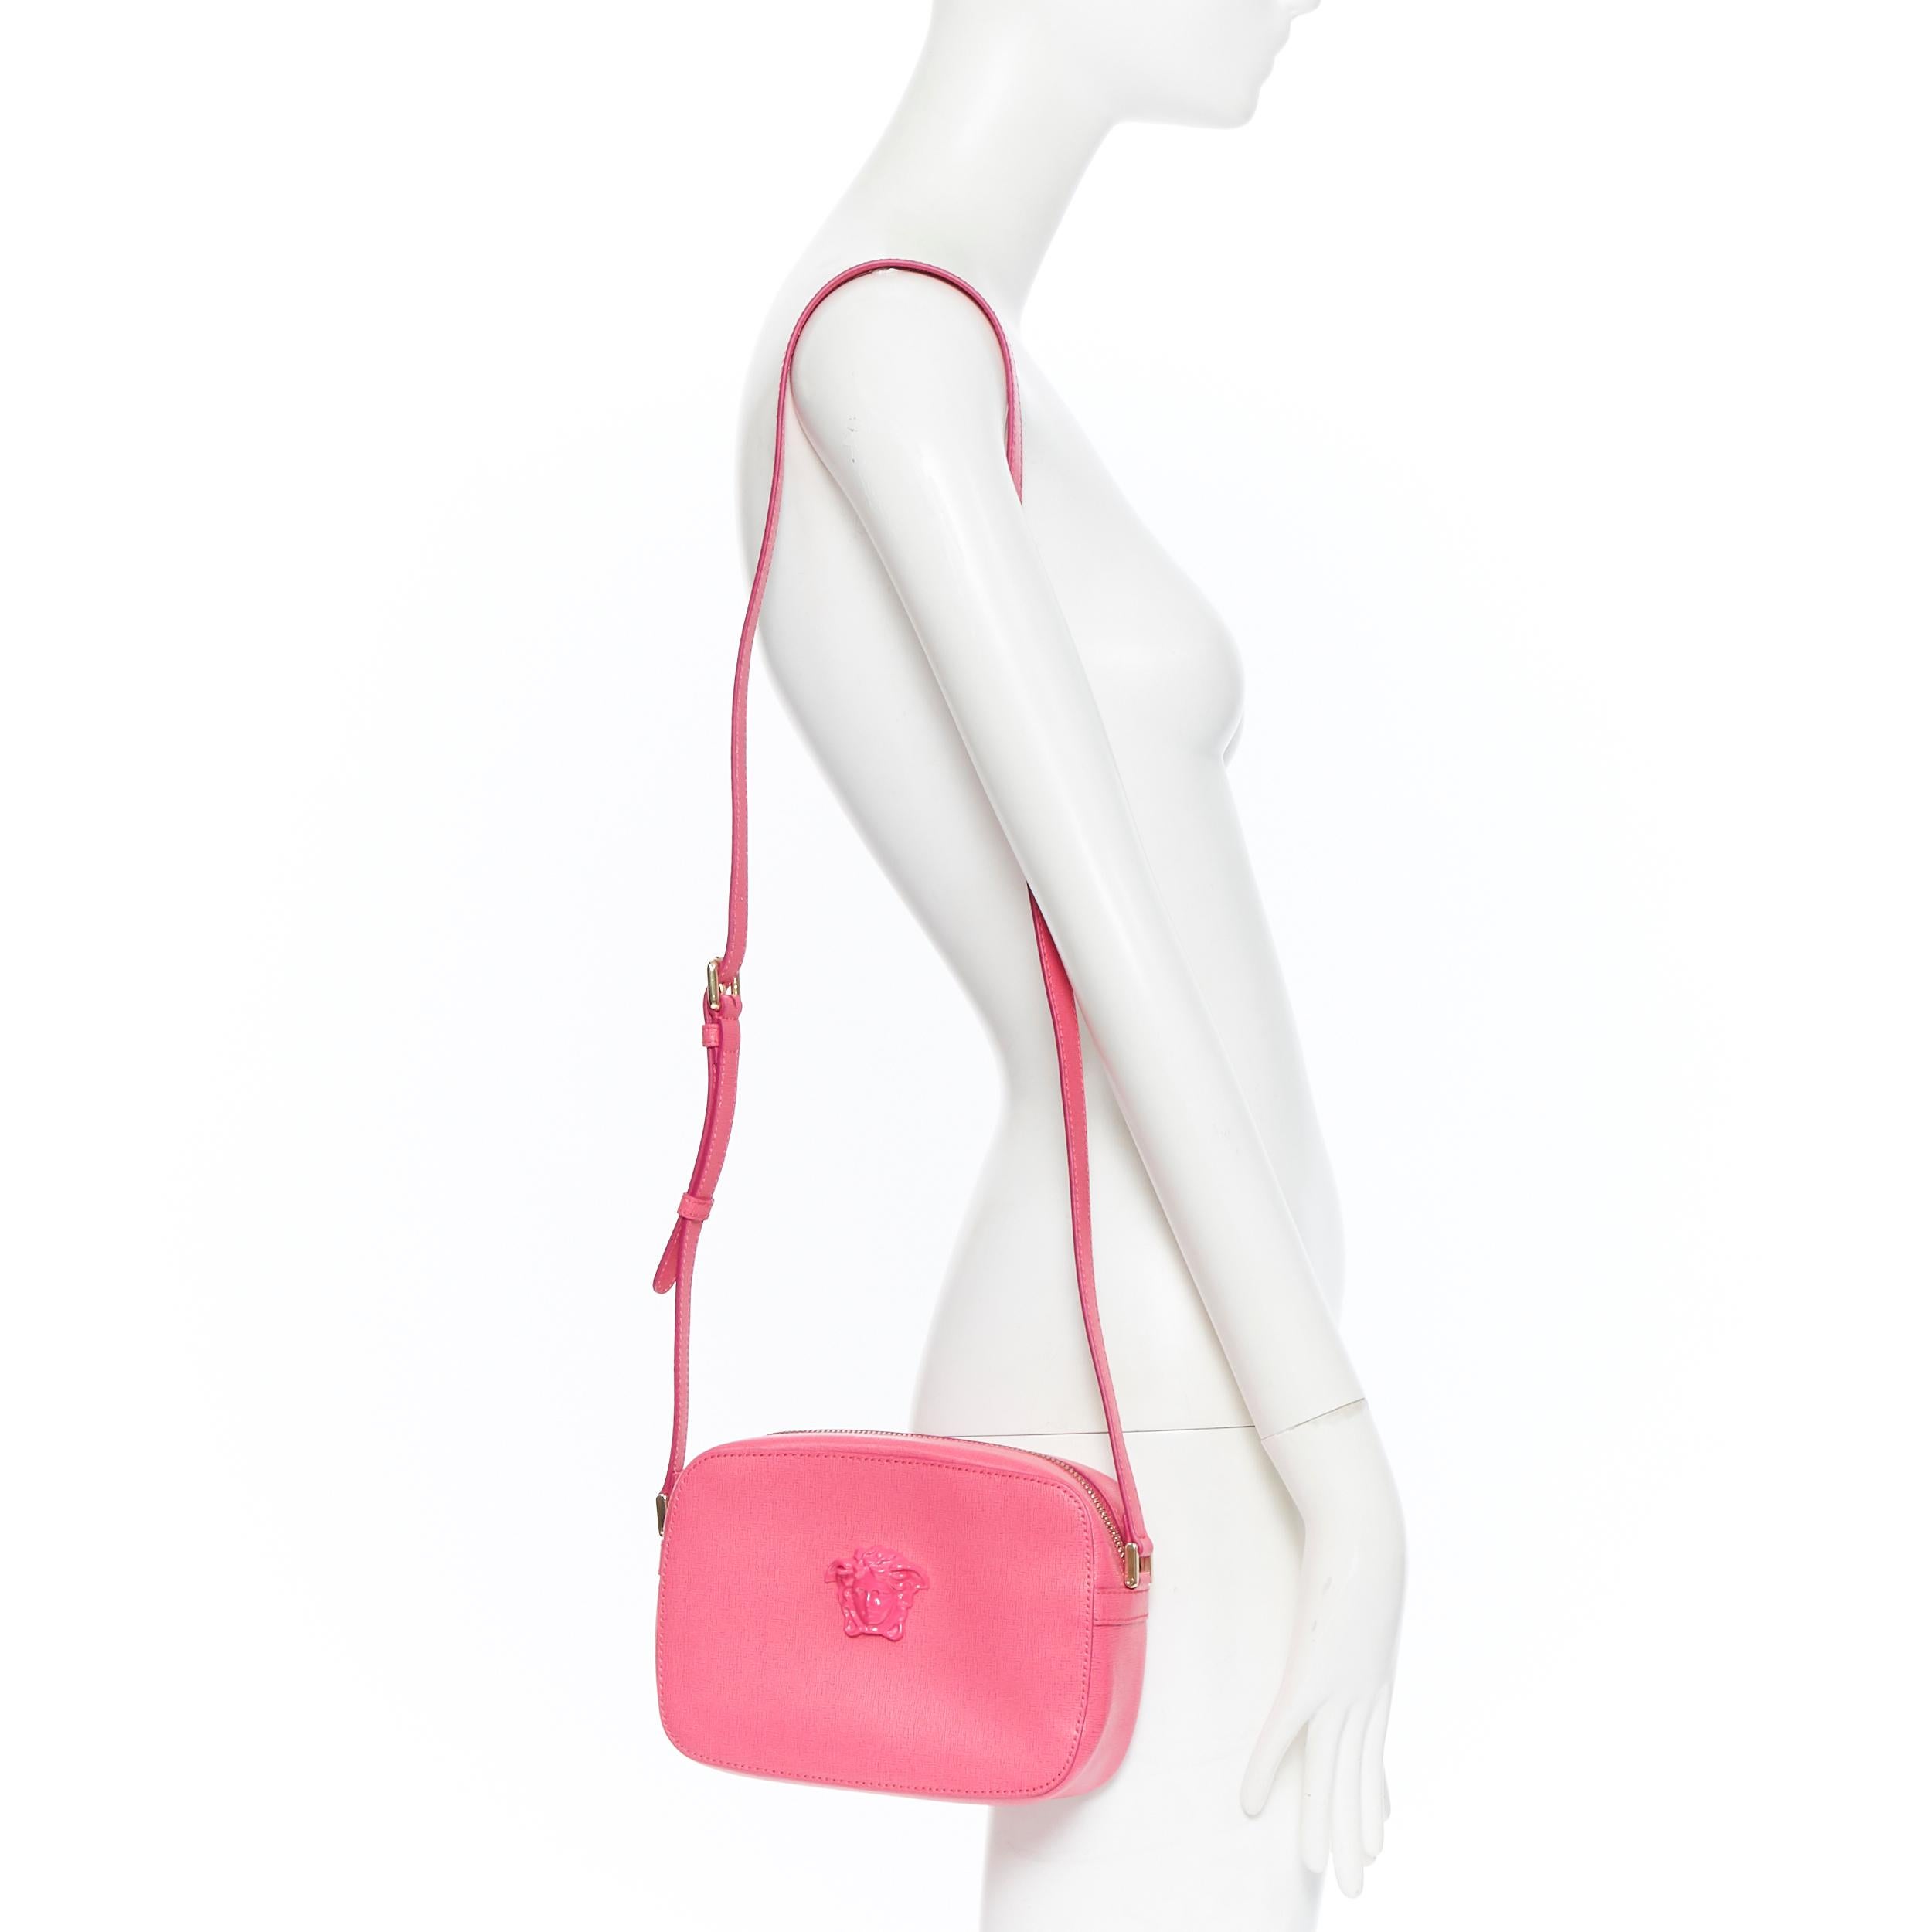 new VERSACE fuchsia pink Medusa head charm rectangular crossbody camera bag
Brand: Versace
Designer: Donatella Versace
Model Name / Style: Palazzo Camera
Material: Leather; saffiano leather
Color: Pink
Pattern: Solid
Closure: Zip
Lining material: